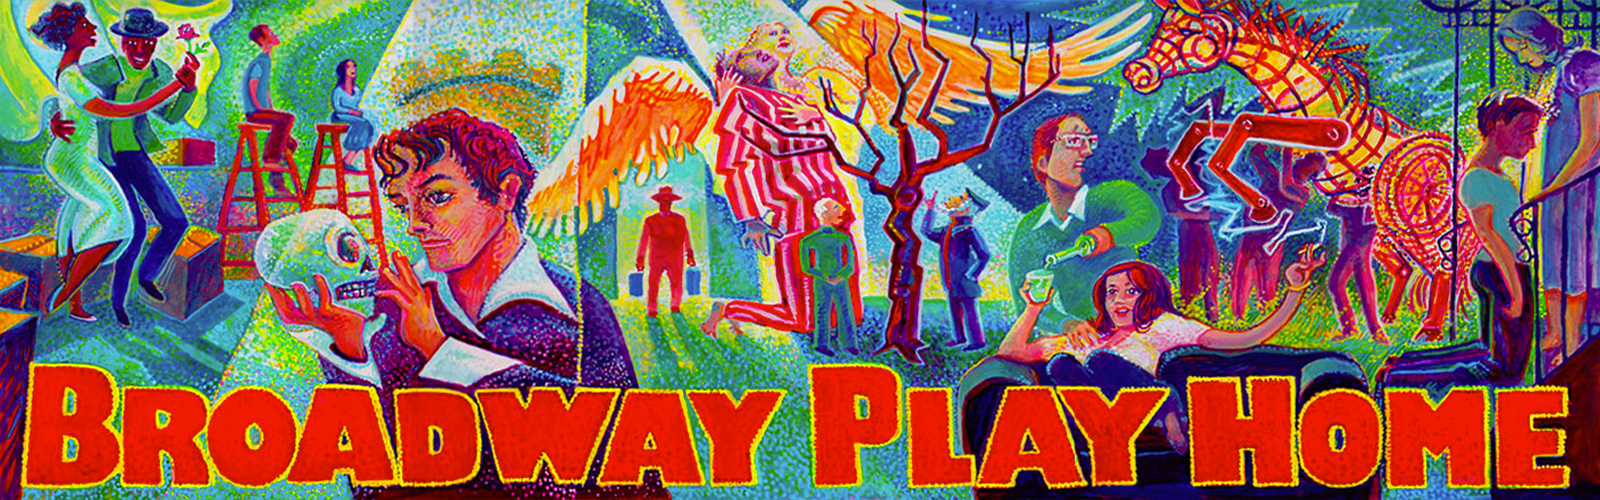 Broadway Play Home